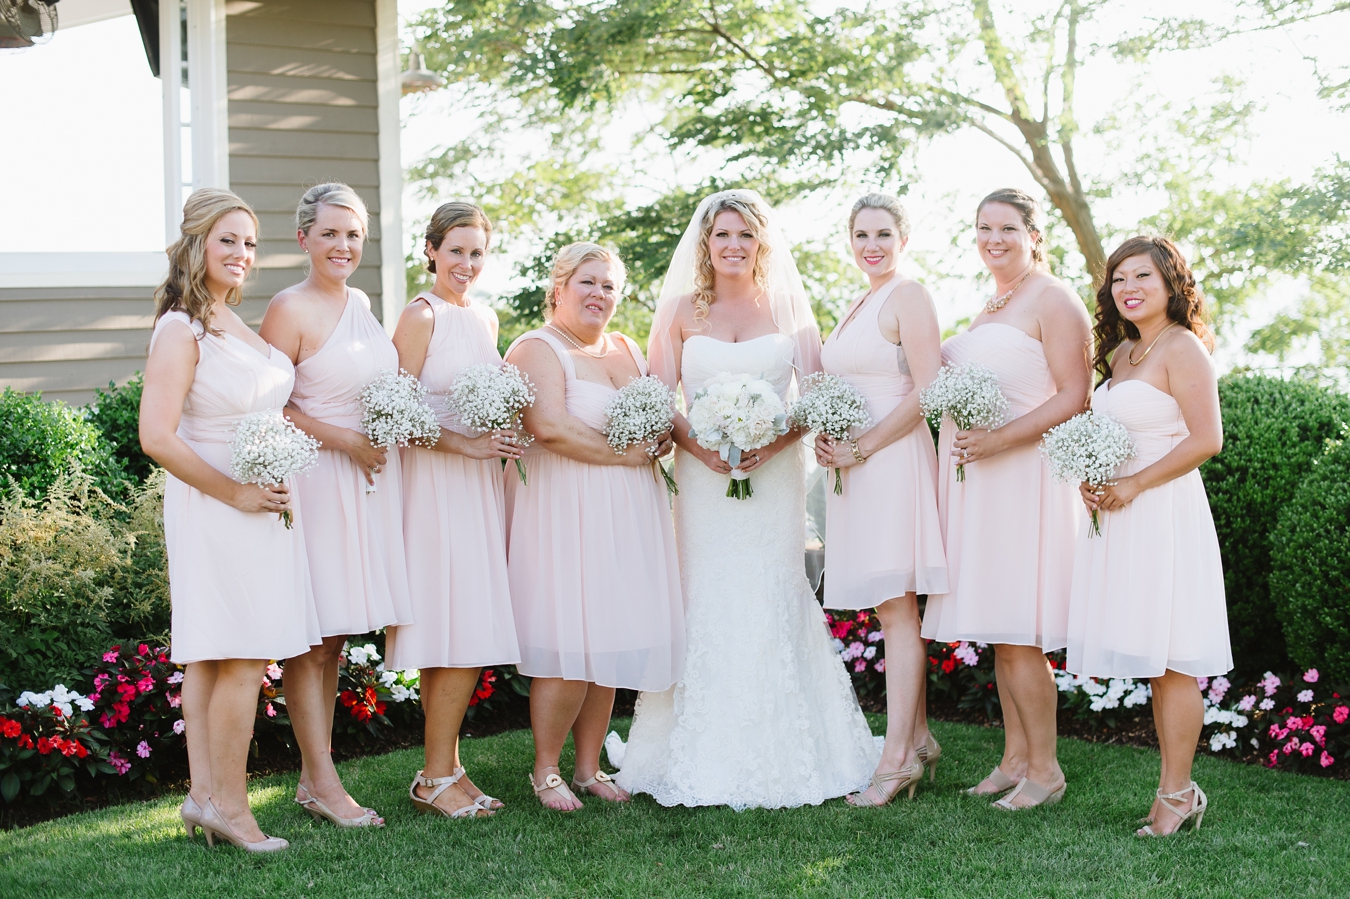 Baby's Breath Bouquets and Blush Pink Chiffon Bridesmaids Dresses | Natalie Franke Photography